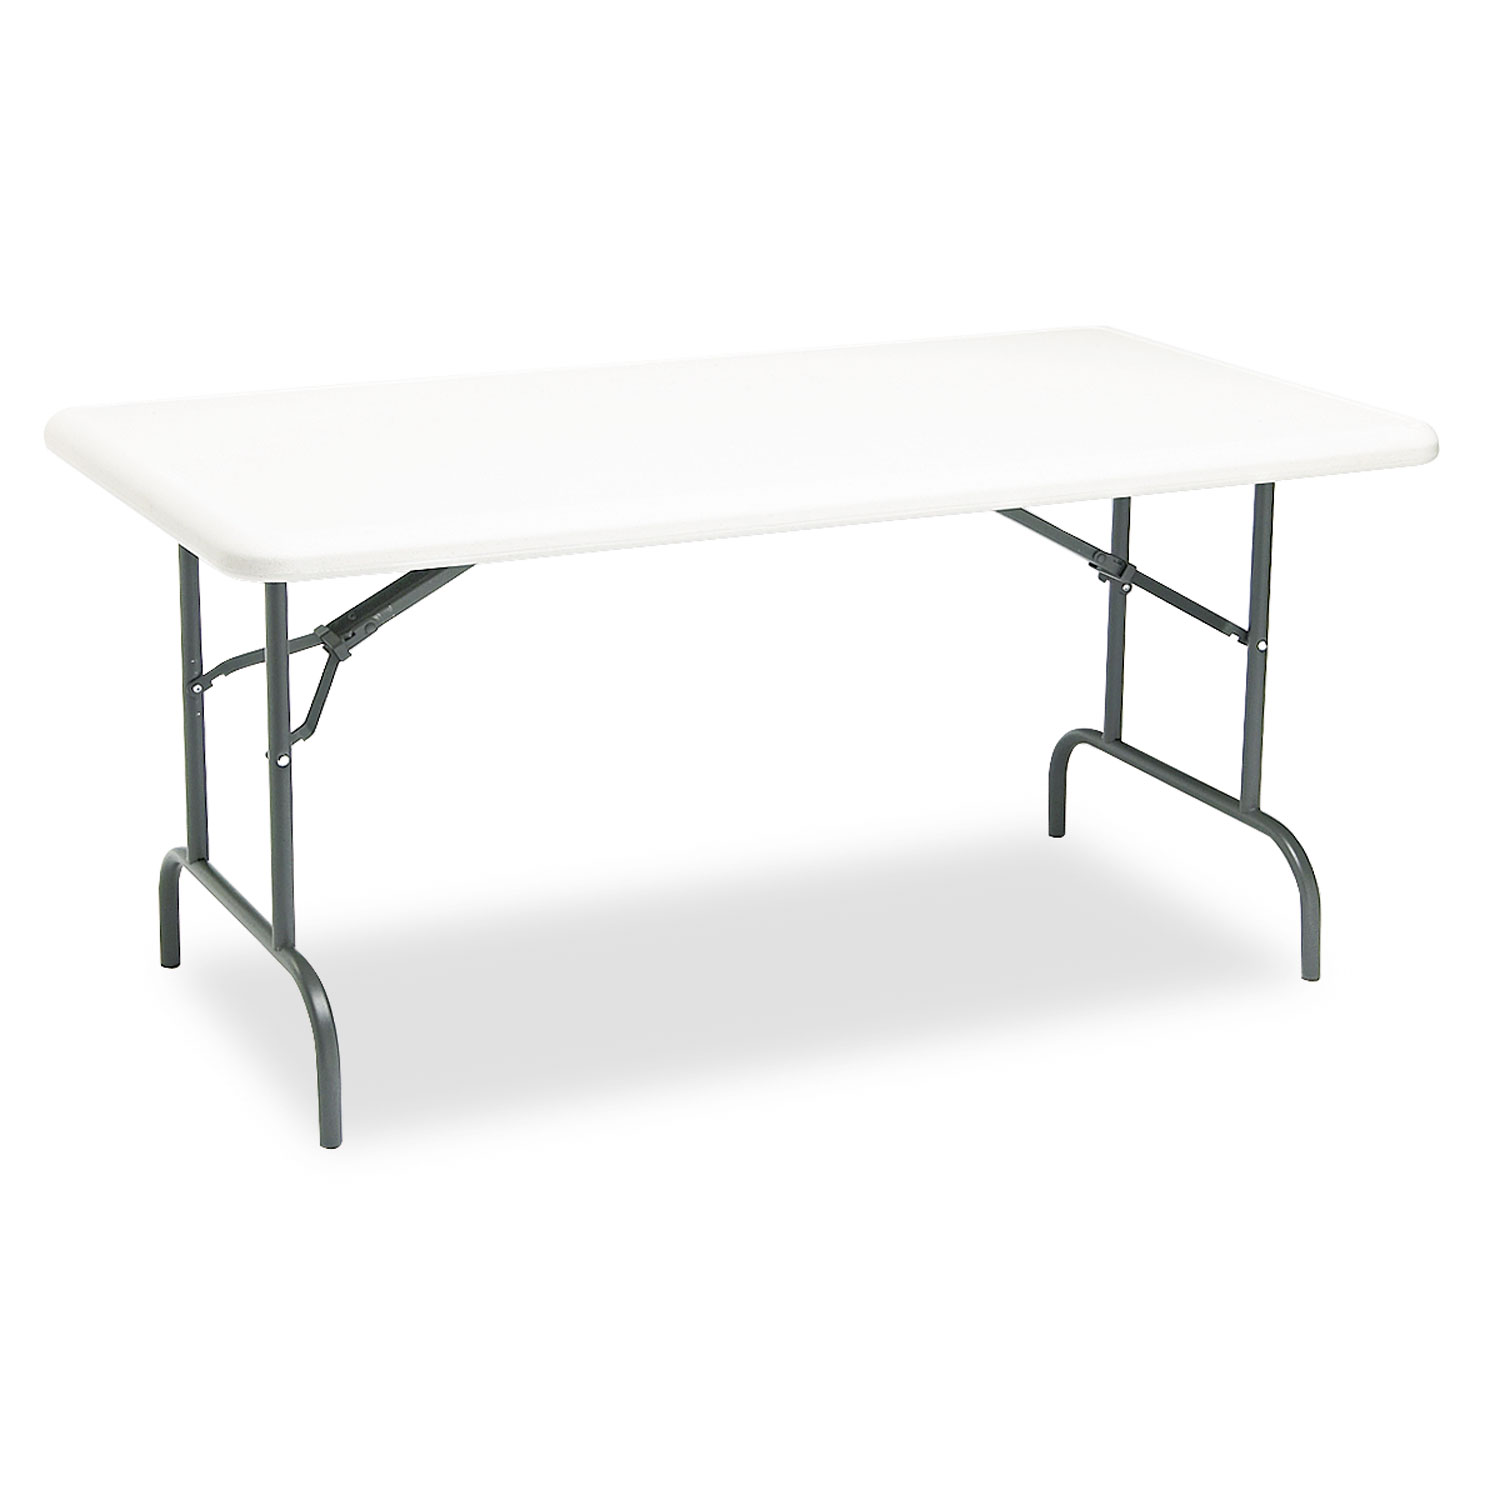  Iceberg 65213 IndestrucTables Too 1200 Series Folding Table, 60w x 30d x 29h, Platinum (ICE65213) 